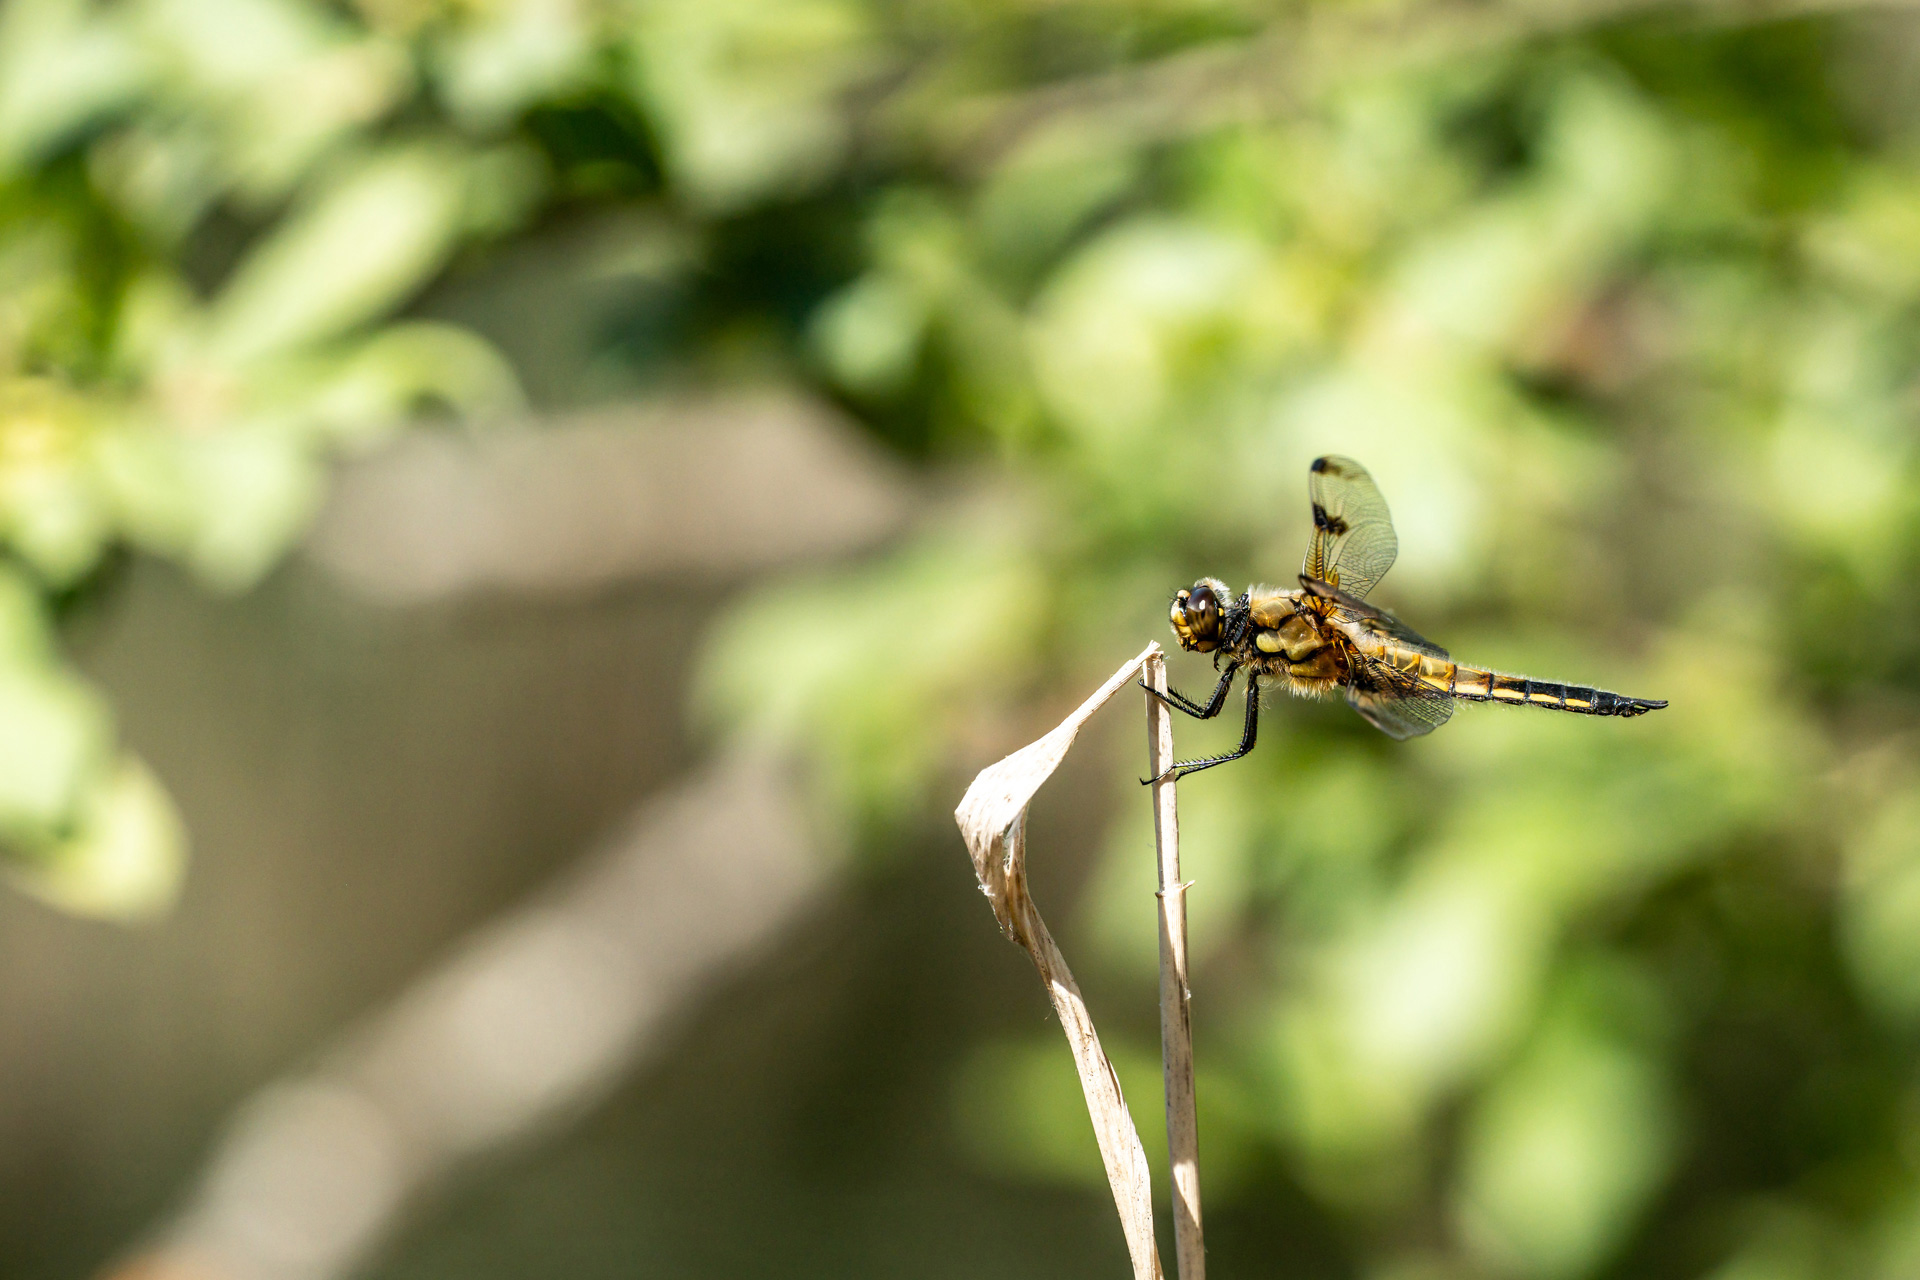 Dragonfly sitting on a stalk, foliage in the background